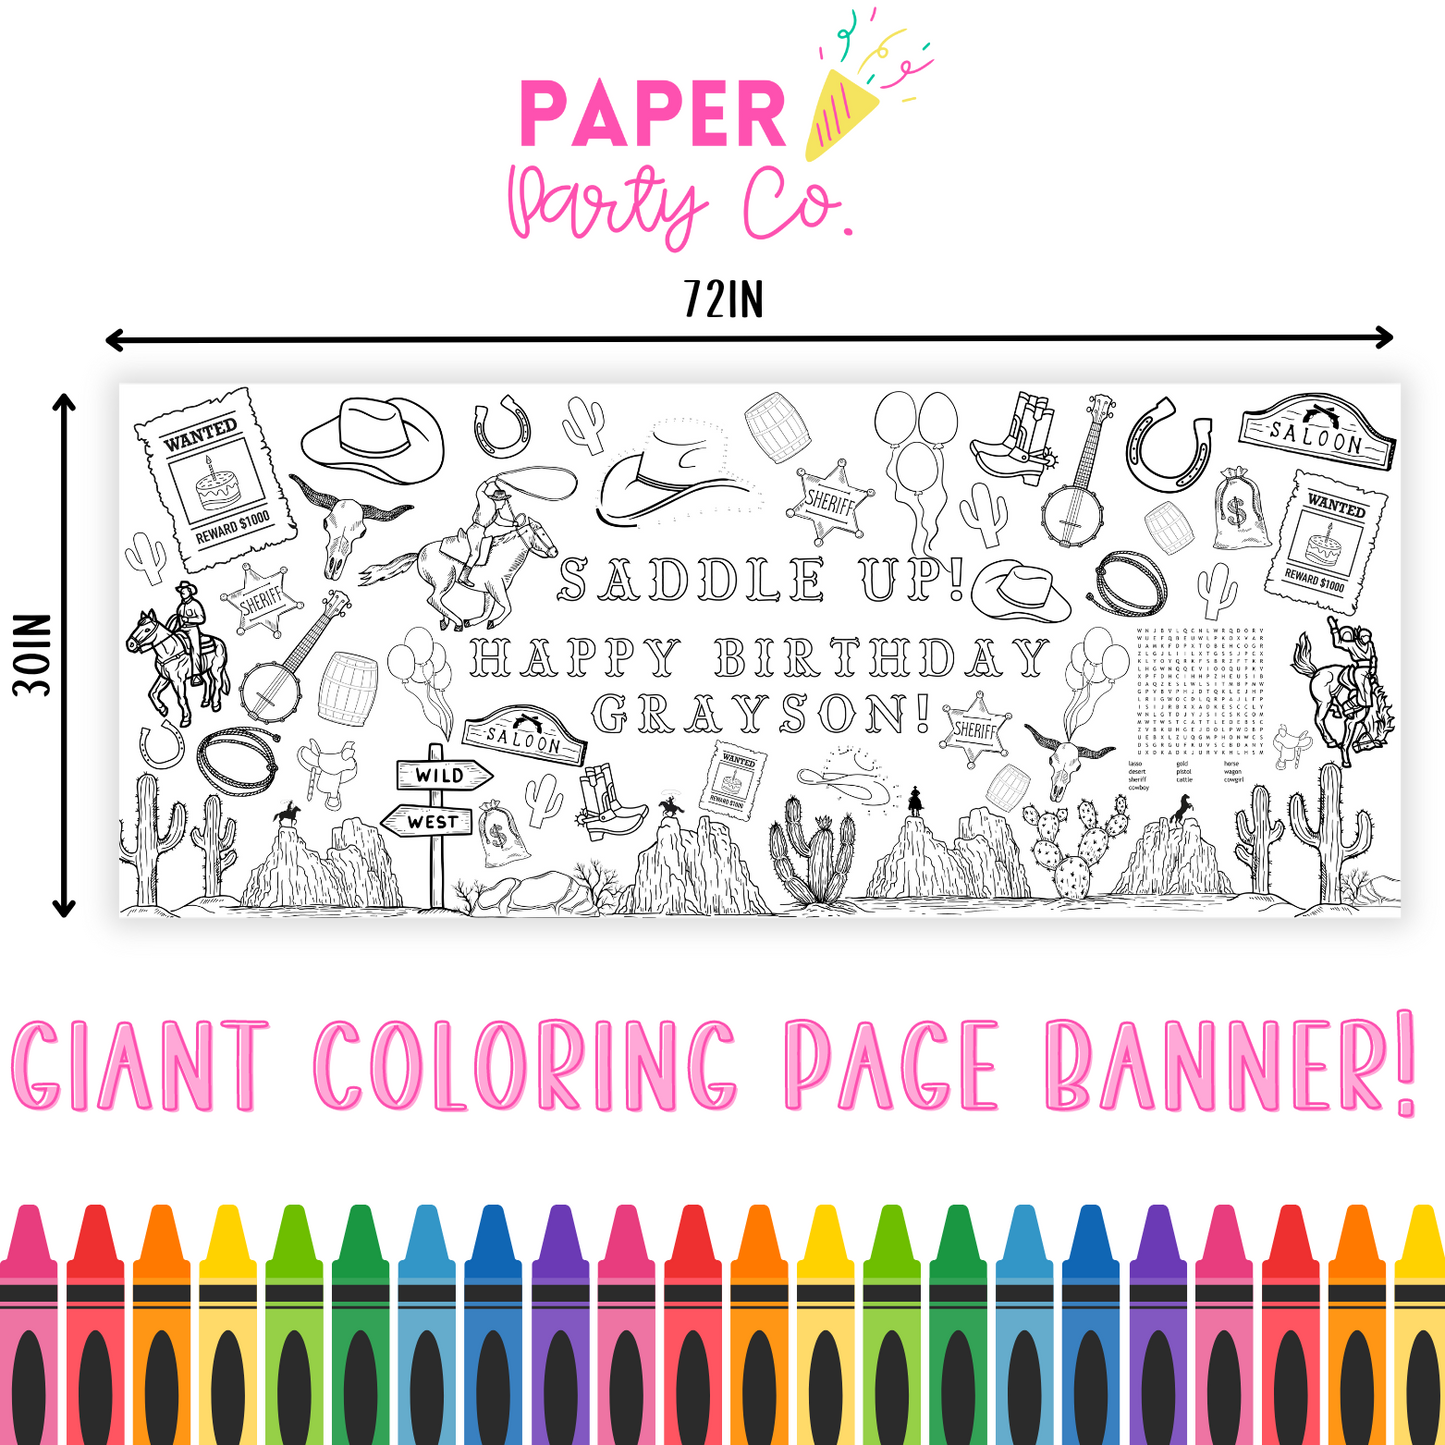 LARGE Rodeo Coloring Banner Sheet | Rodeo Birthday | Cowboy Coloring Poster | Saddle Up | First Rodeo | Giant Coloring Sheet | Rodeo Theme